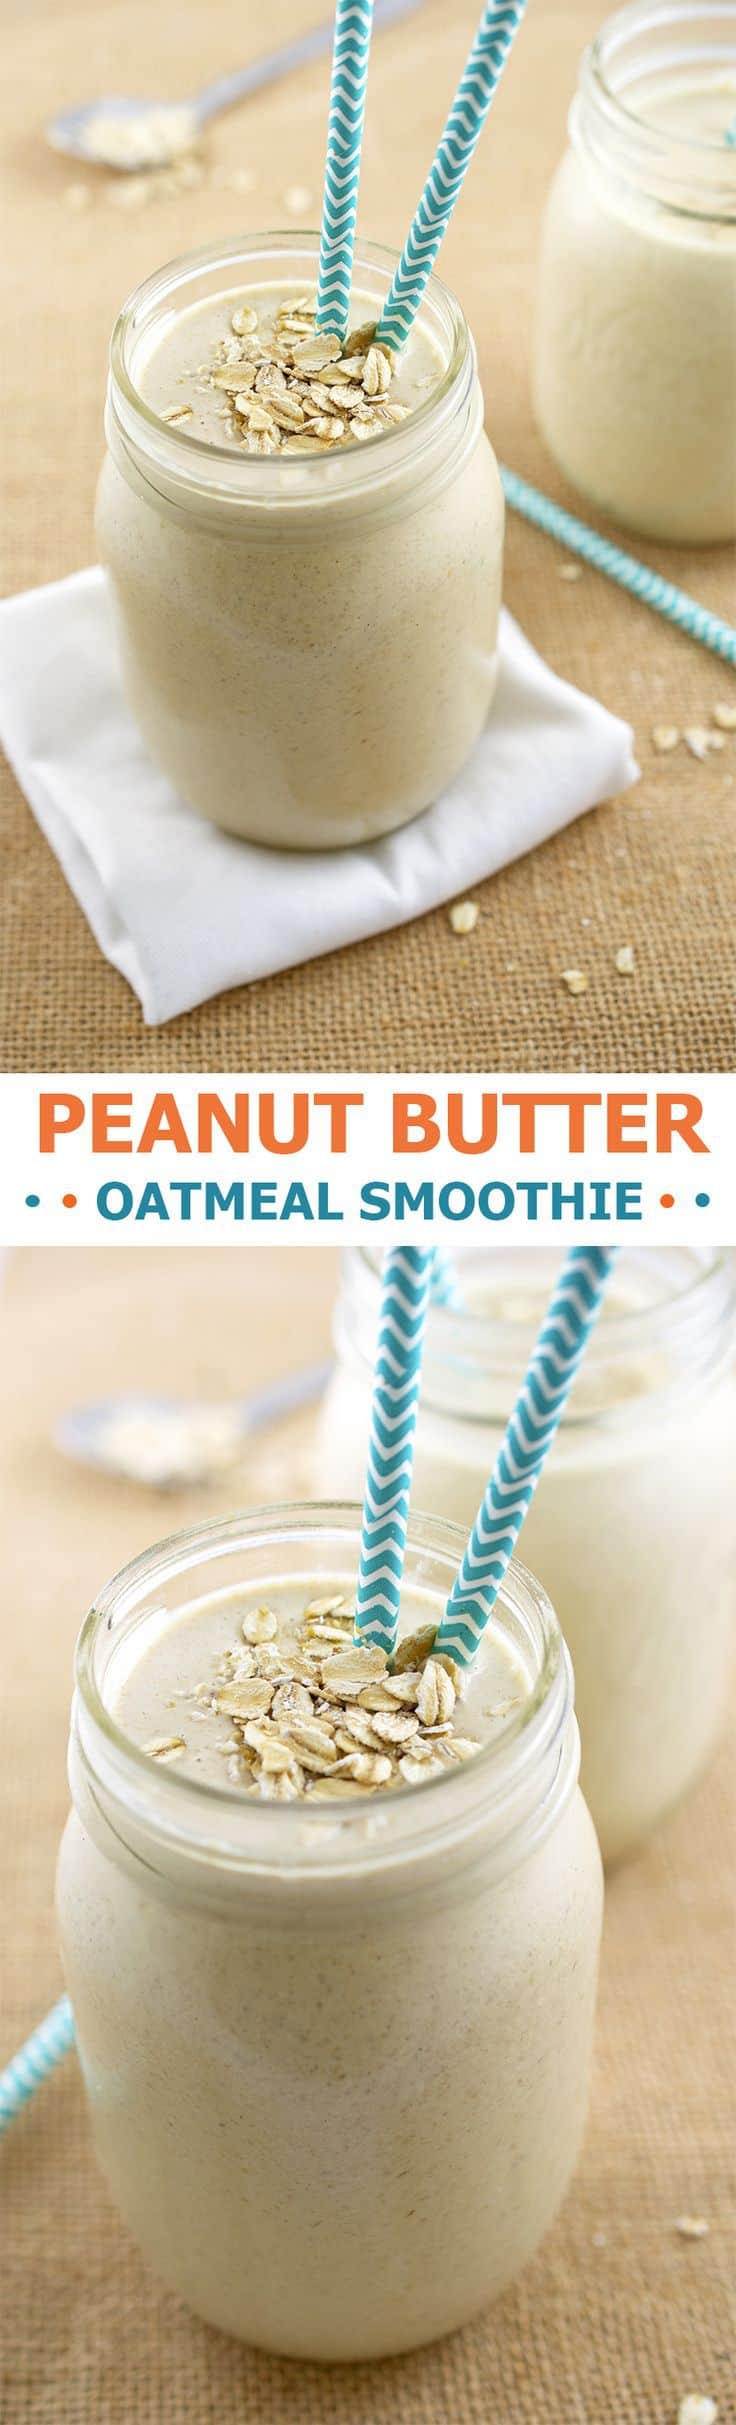 Peanut butter oatmeal smoothie.